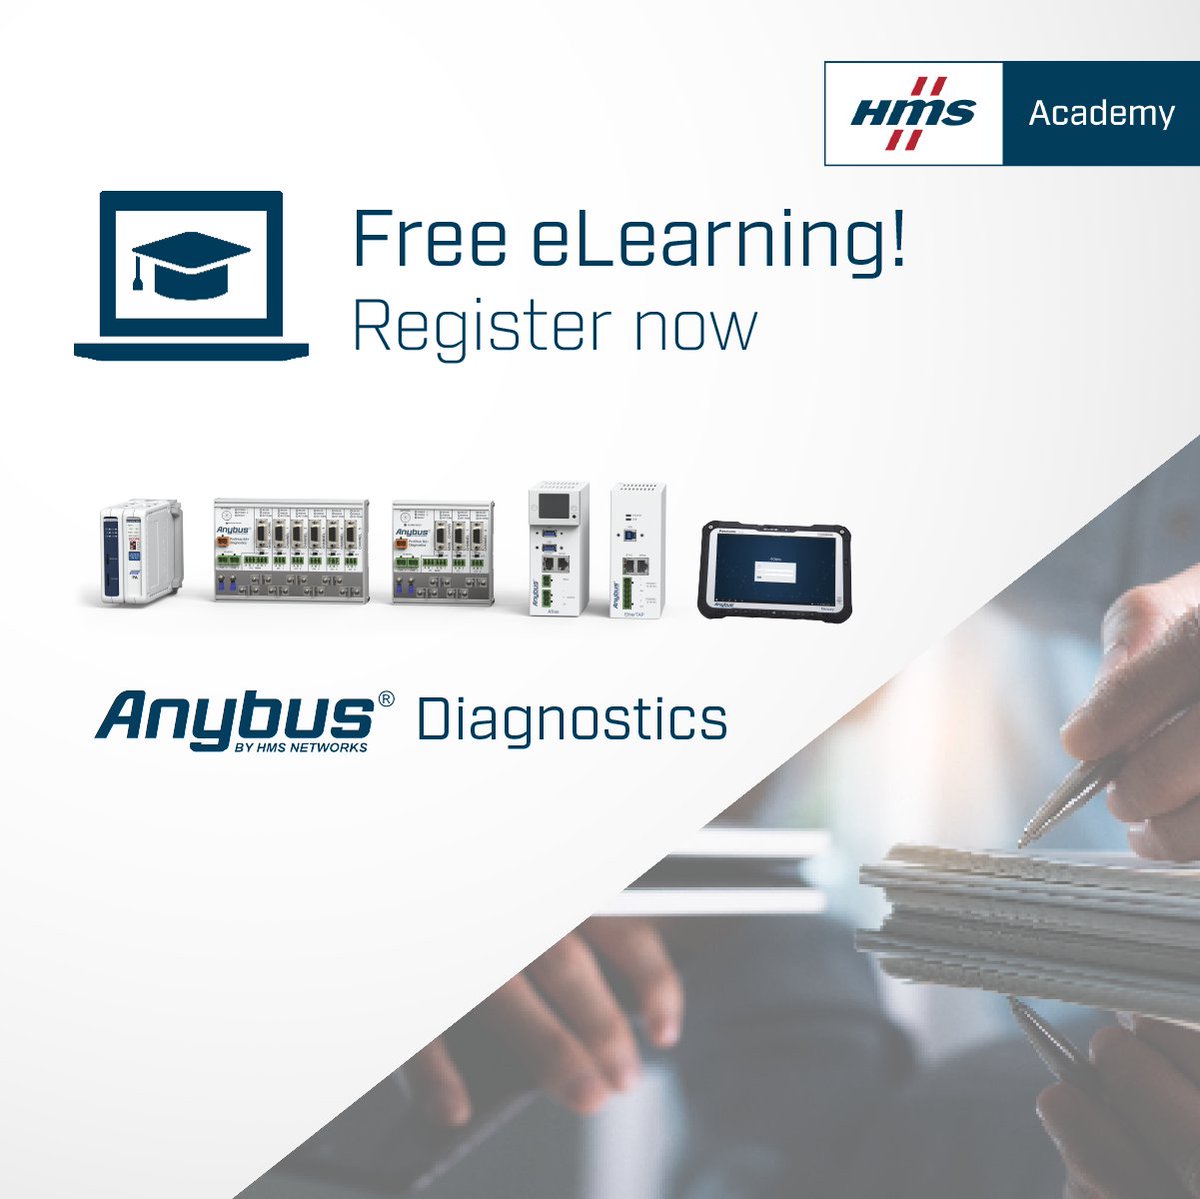 Explore our NEW eLearning courses for quick OT network issue diagnostics! And the best part? It's all for FREE! Enhance your proficiency and network health with HMS Networks ➡️ Sign up here and start your training now: anybus.com/about-us/news/… #elearning #network